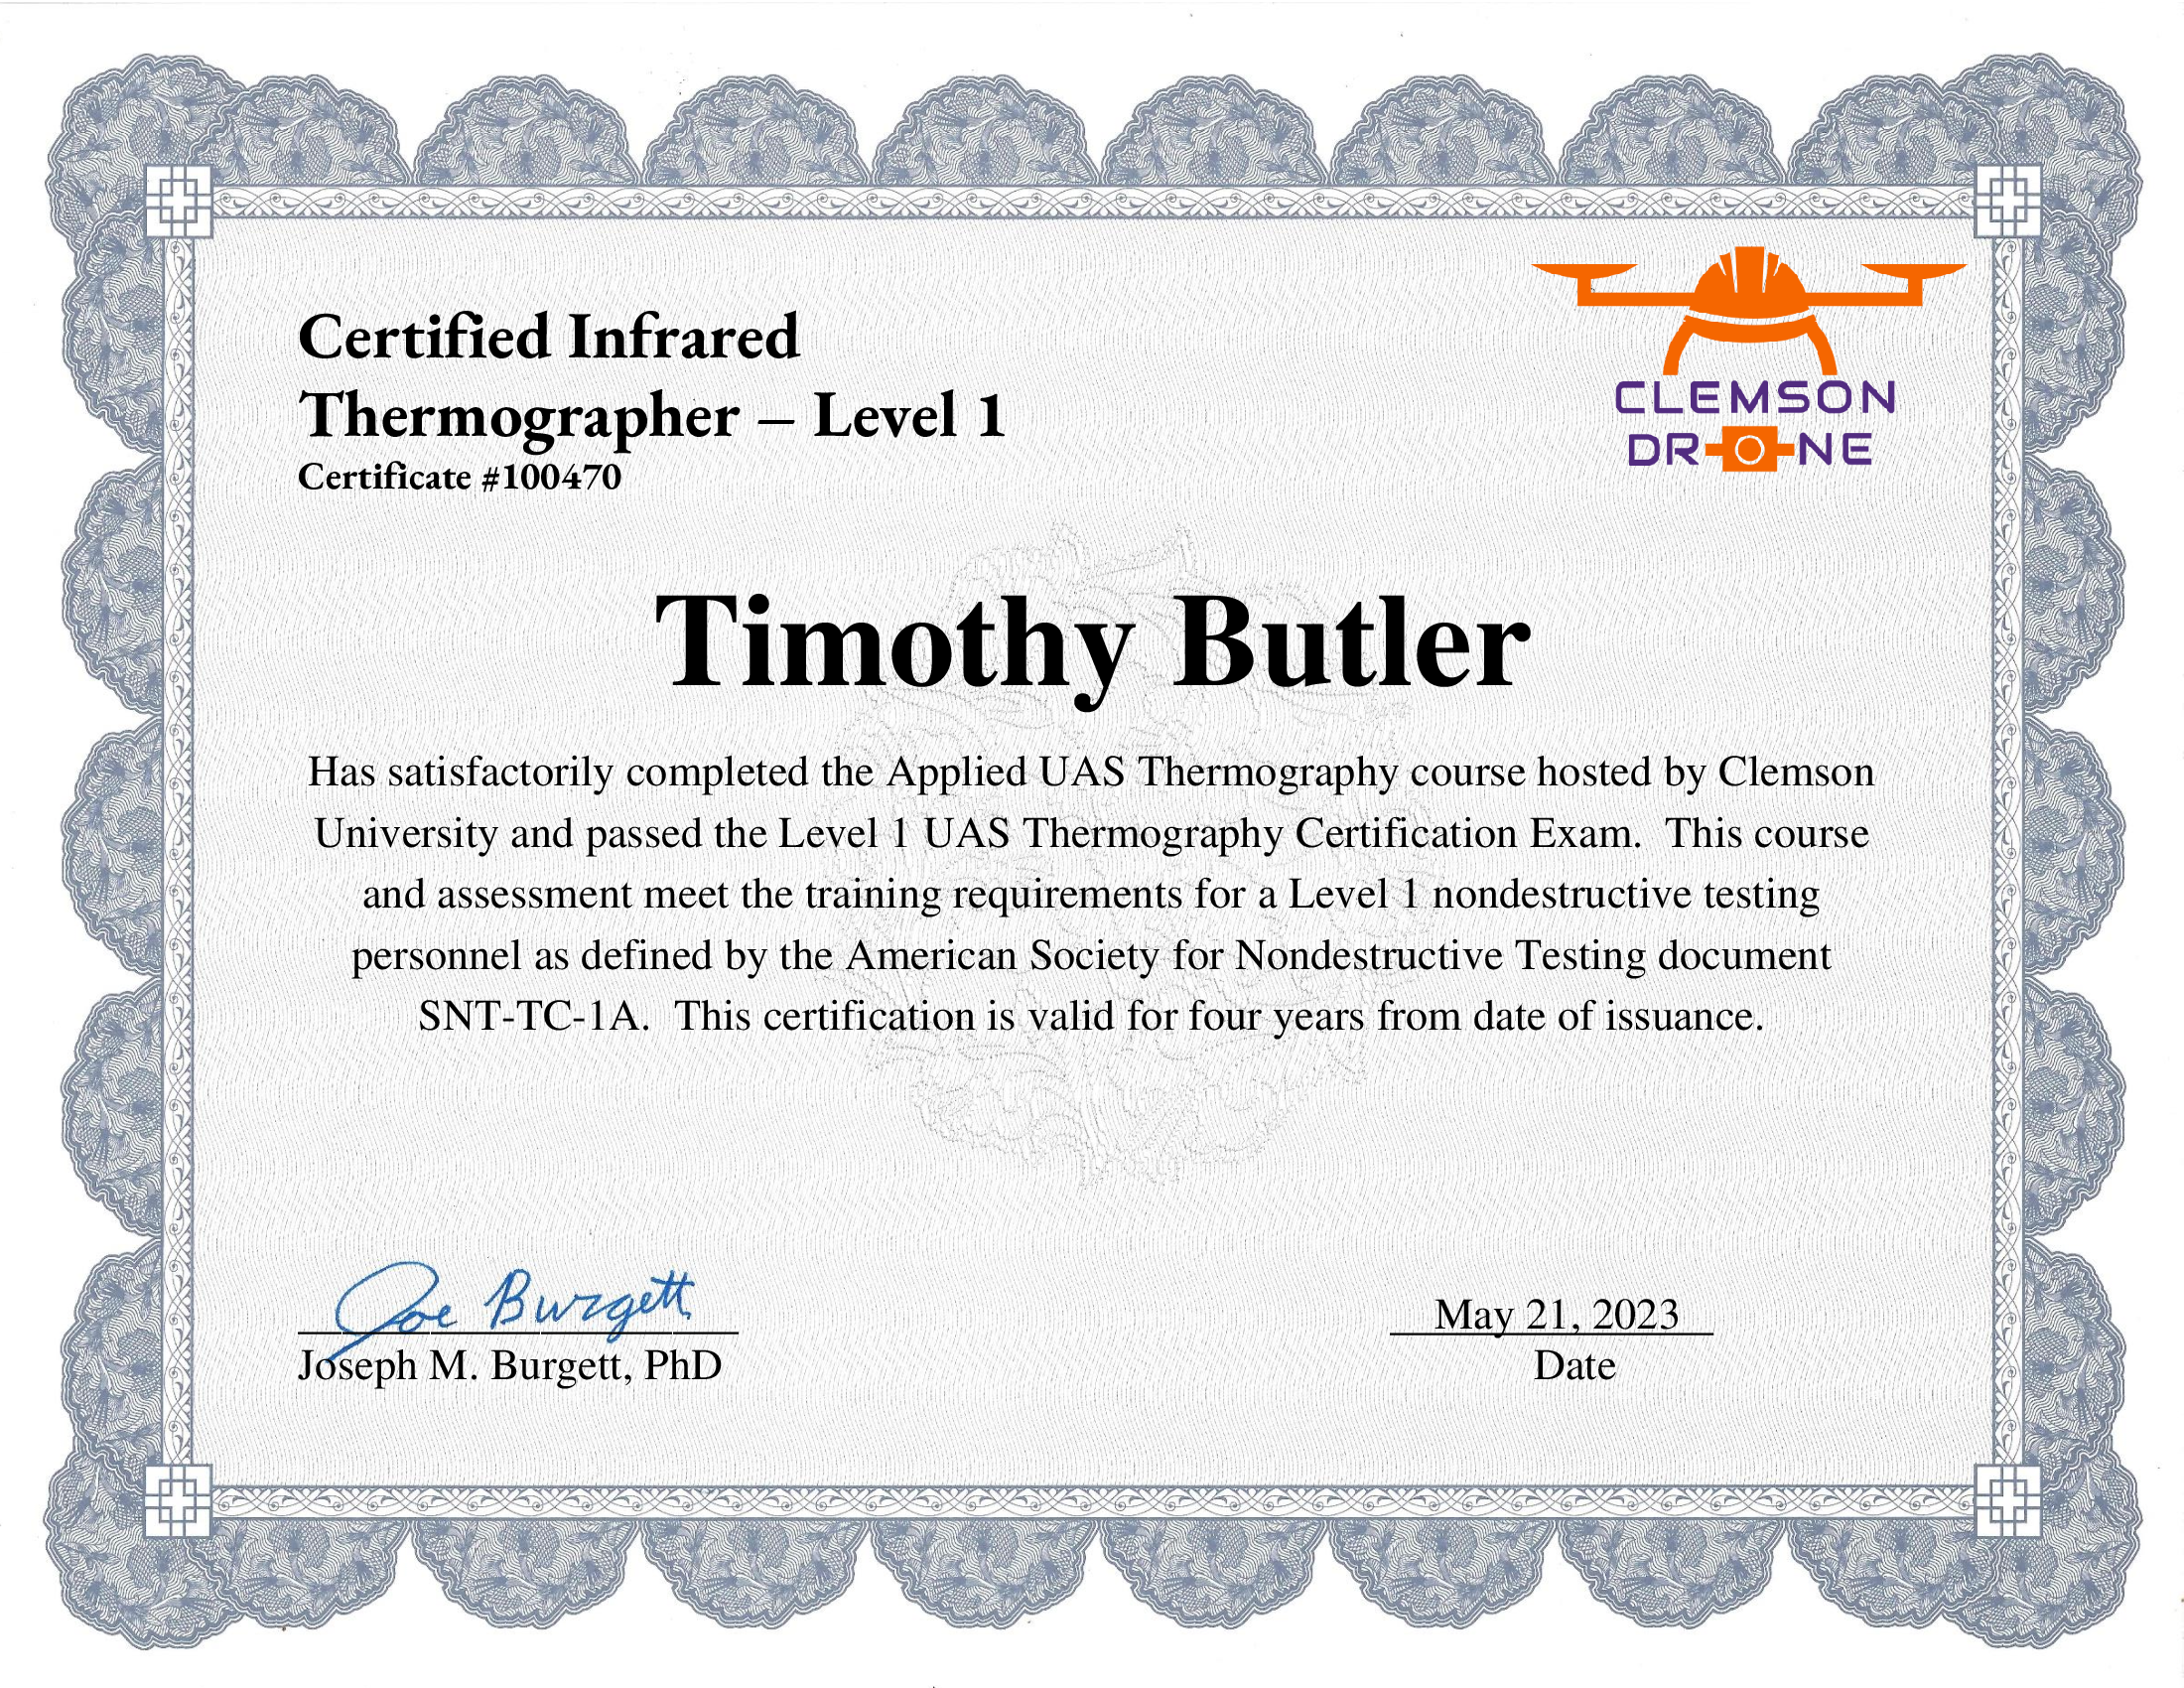 Flying Cowboy Photography Waco Drone Certified Infrared Thermographer Certified